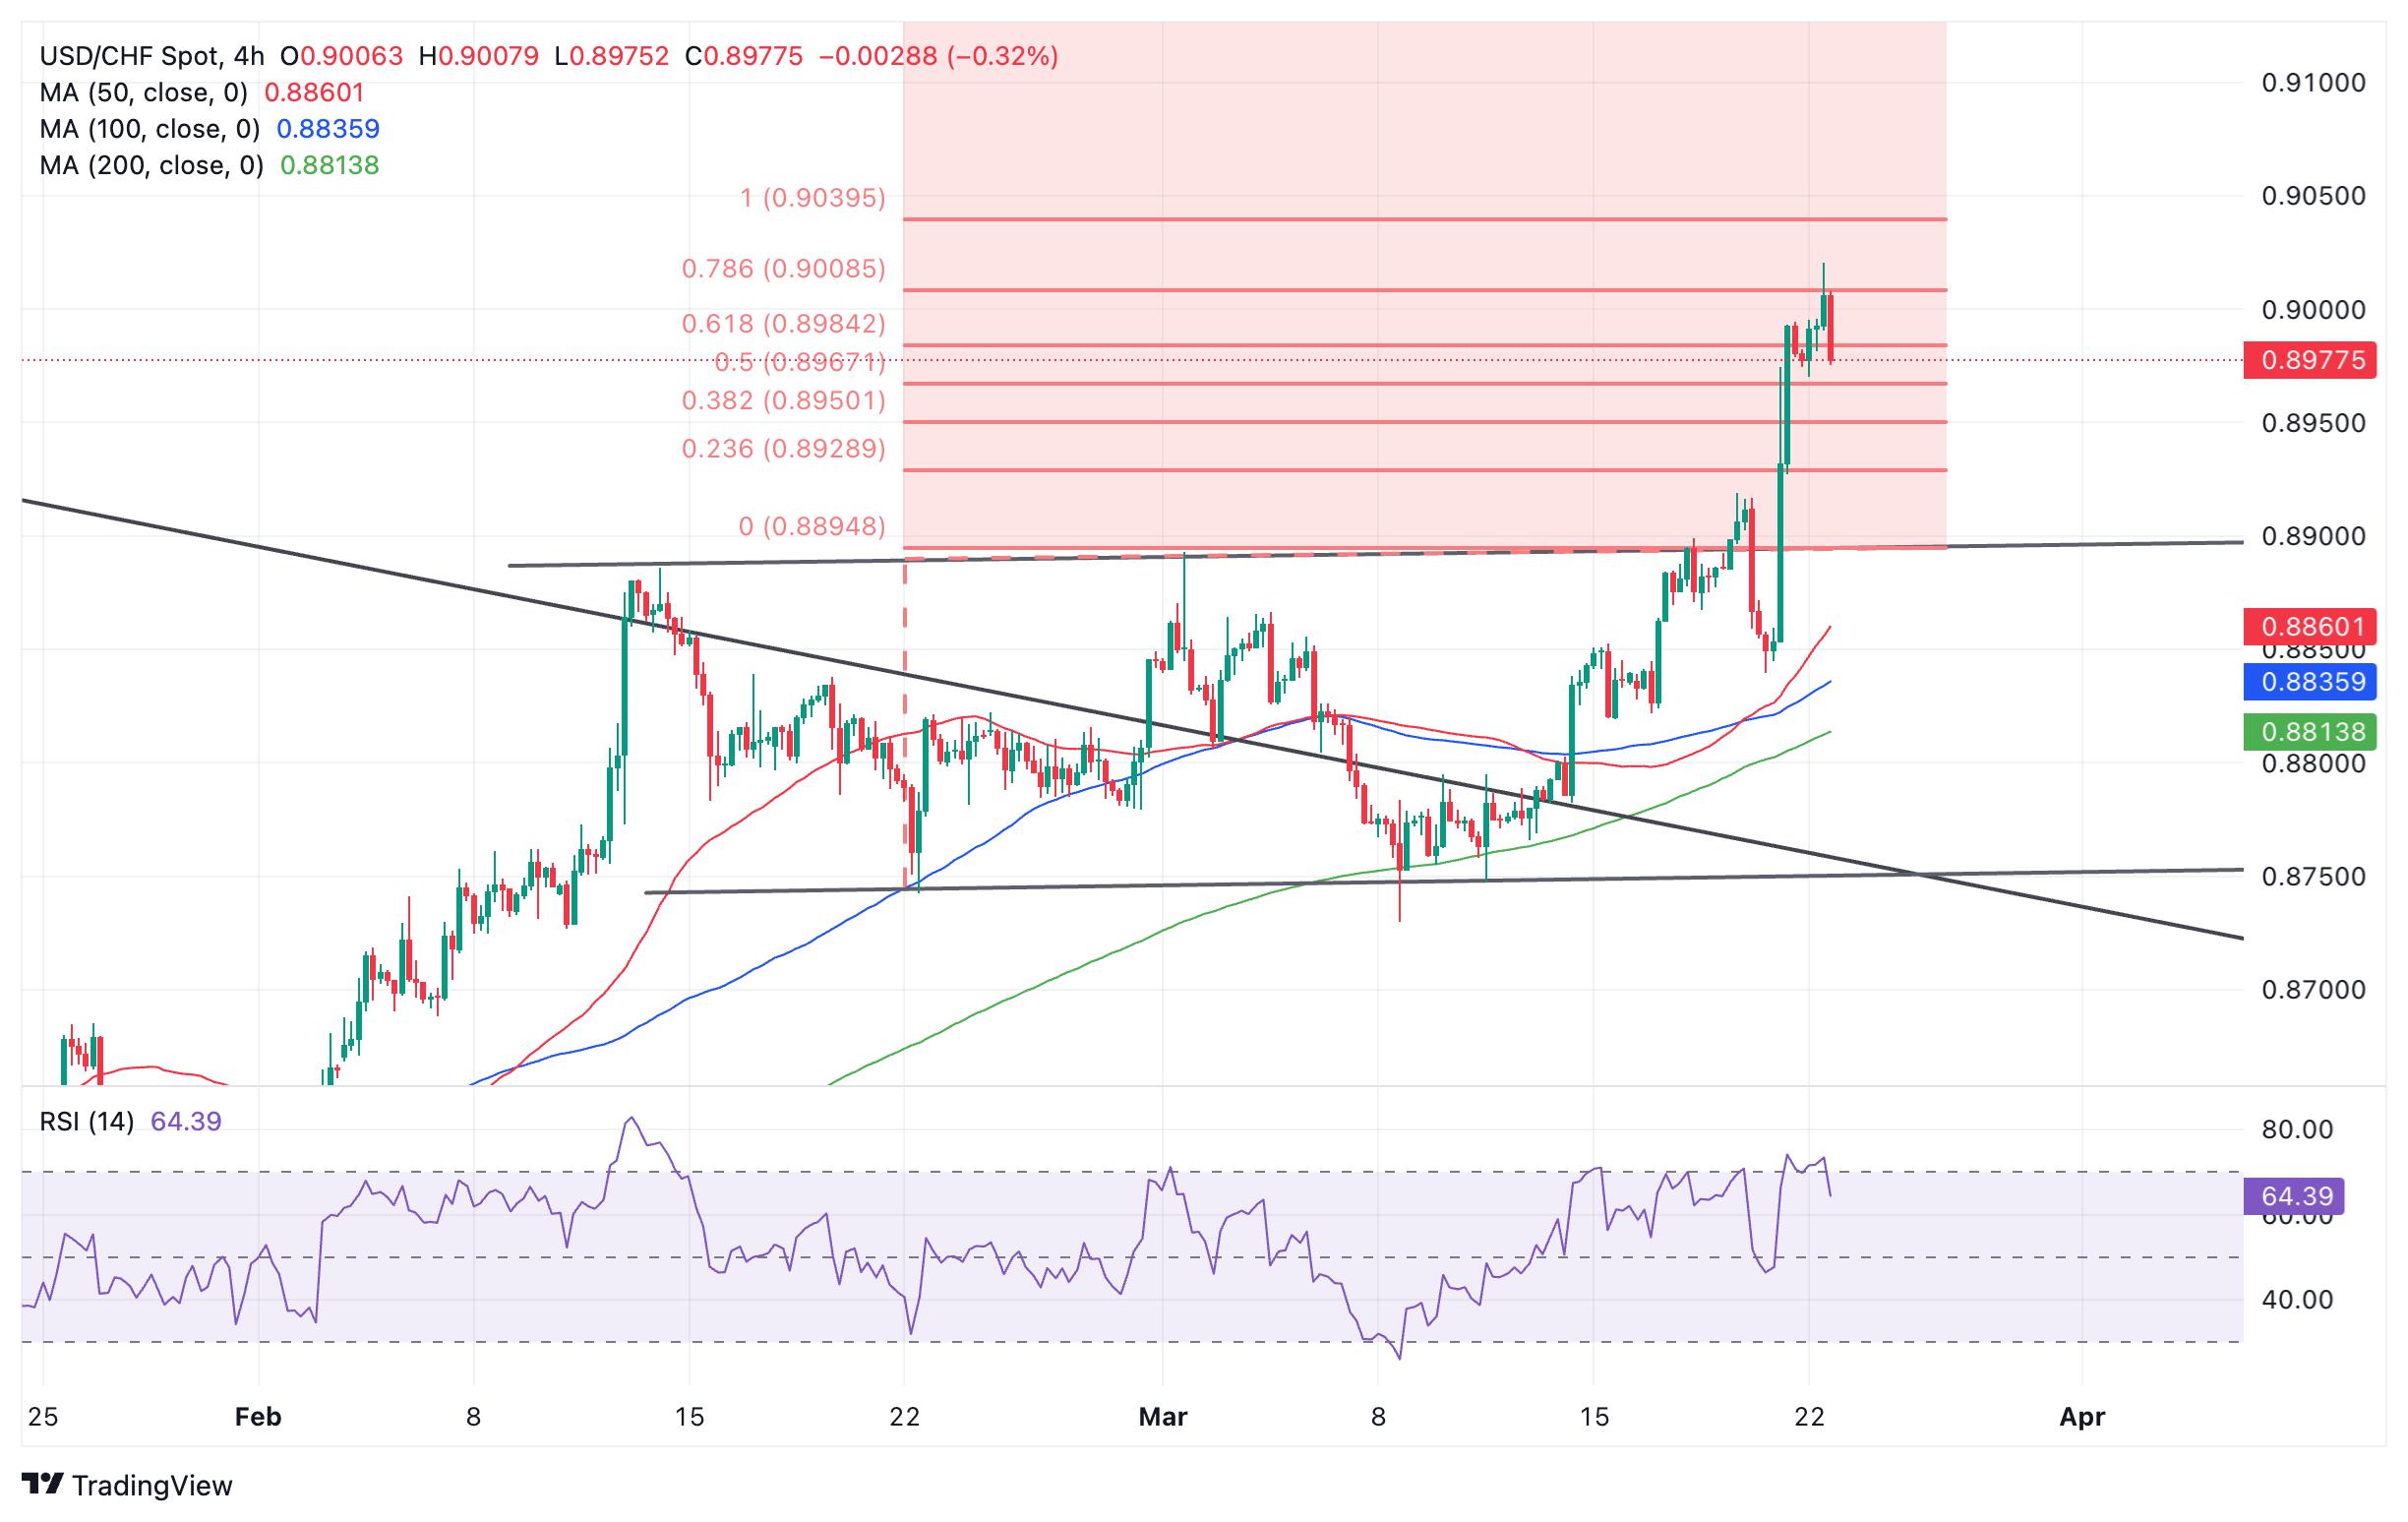 USD/CHF Price Forecast: First breakout target met